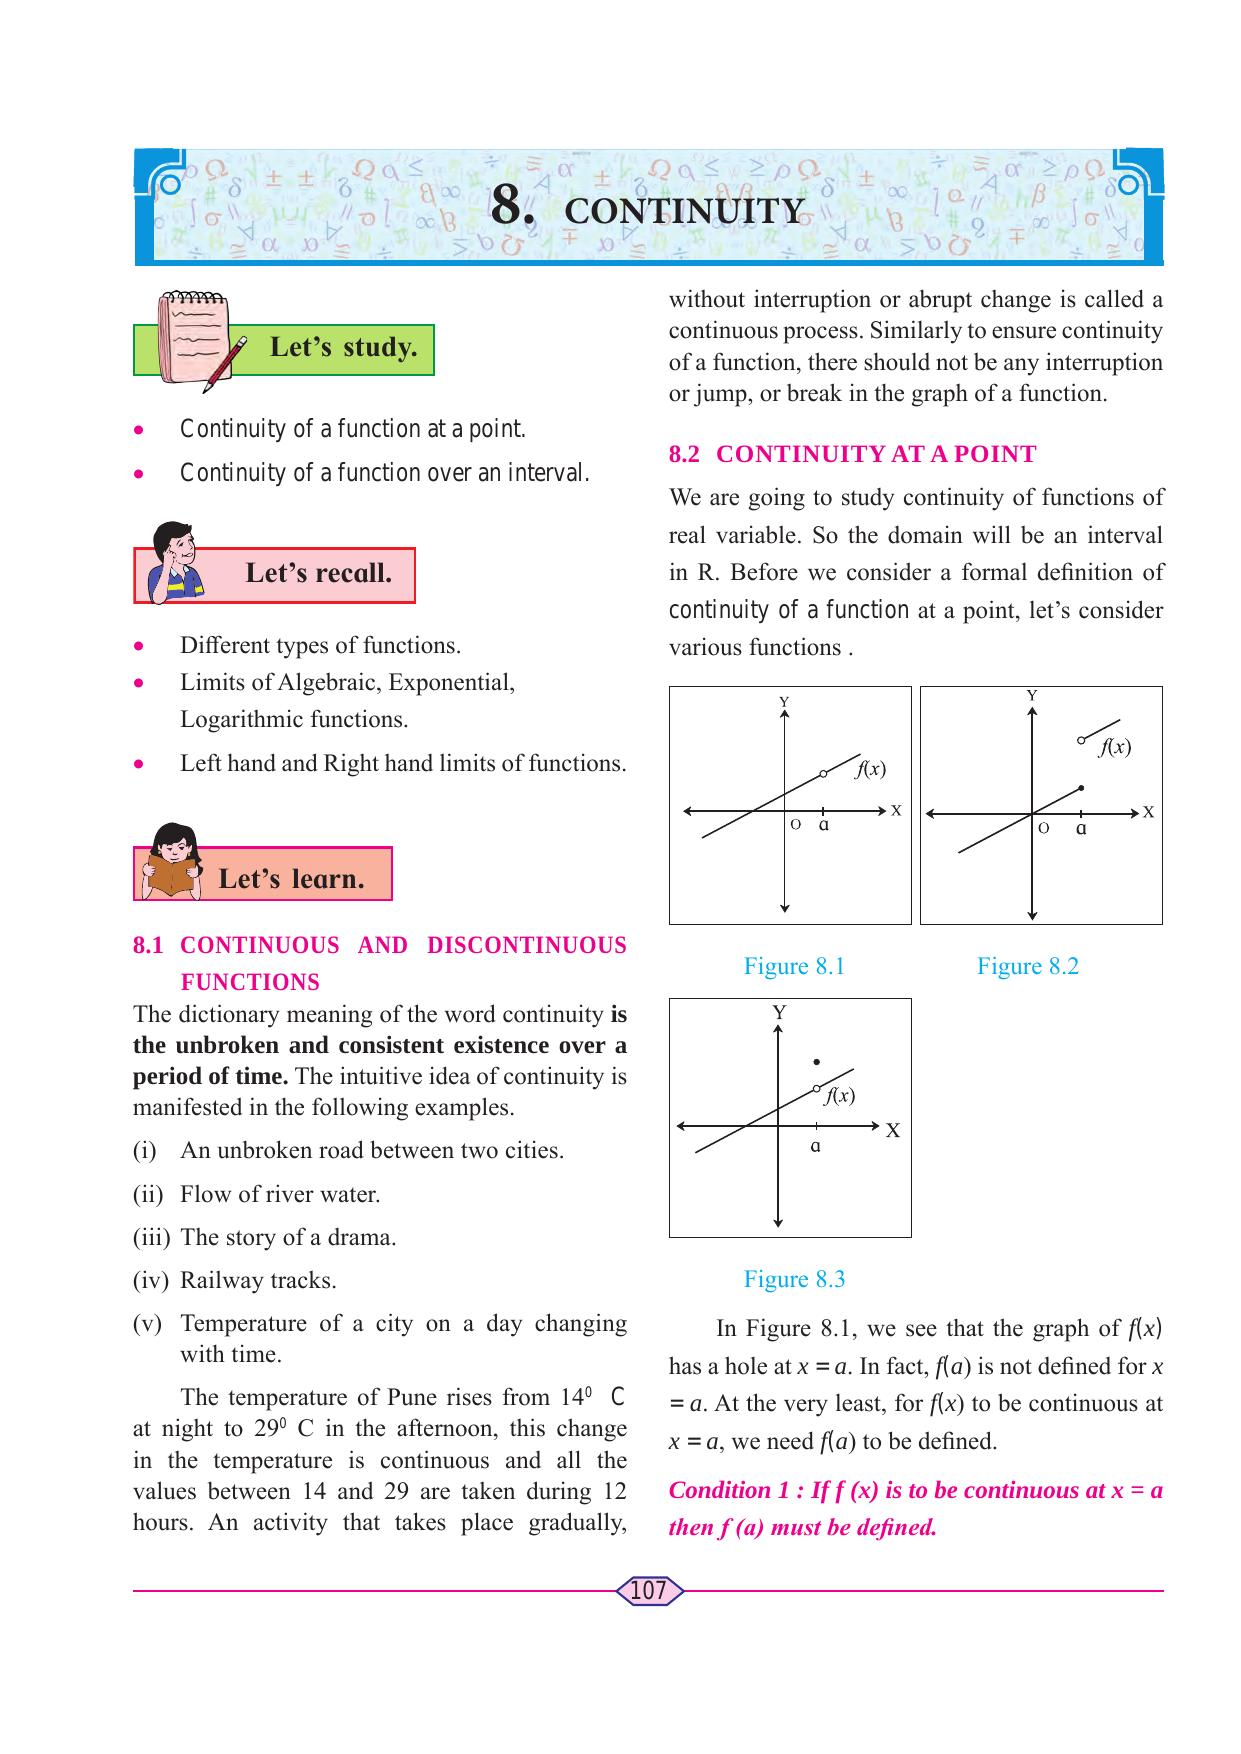 Maharashtra Board Class 11 Maths (Commerce) (Part 1) Textbook - Page 117